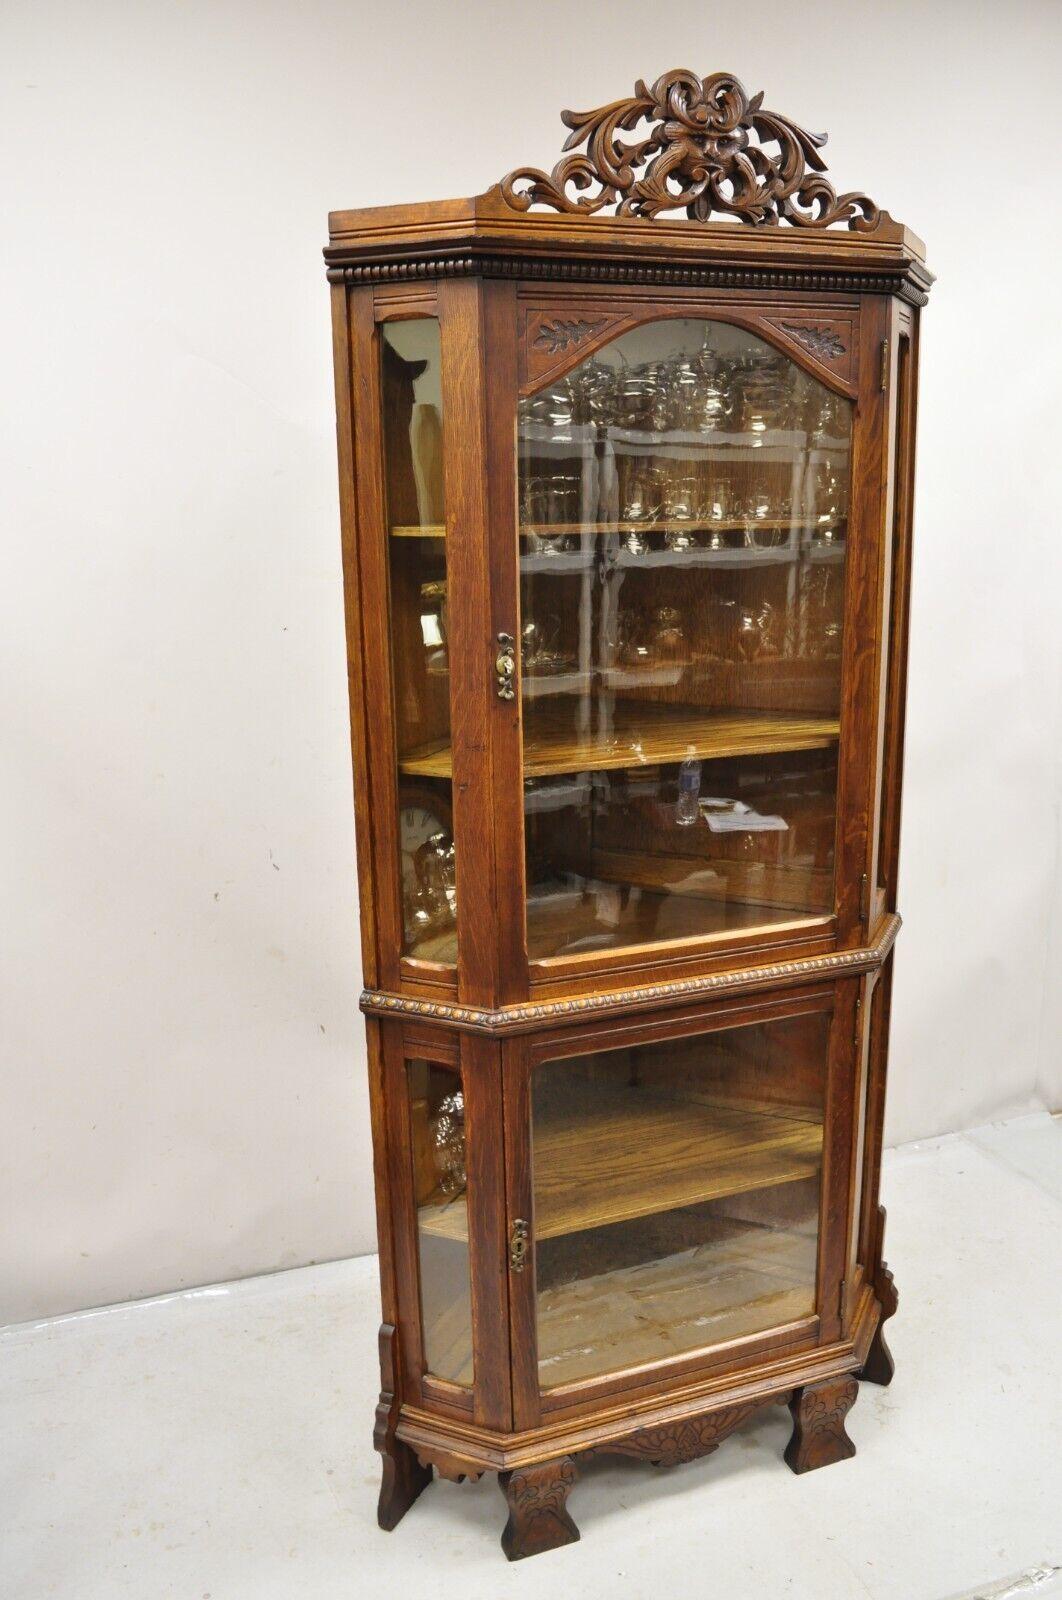 Antique Oak Victorian Renaissance Glass Door Carved Curio Corner China Cabinet. Item features carved Northwind face fretwork pediment, 2 glass swing doors, working lock and key for upper door, 3 wooden shelves, original wavy glass (except one small